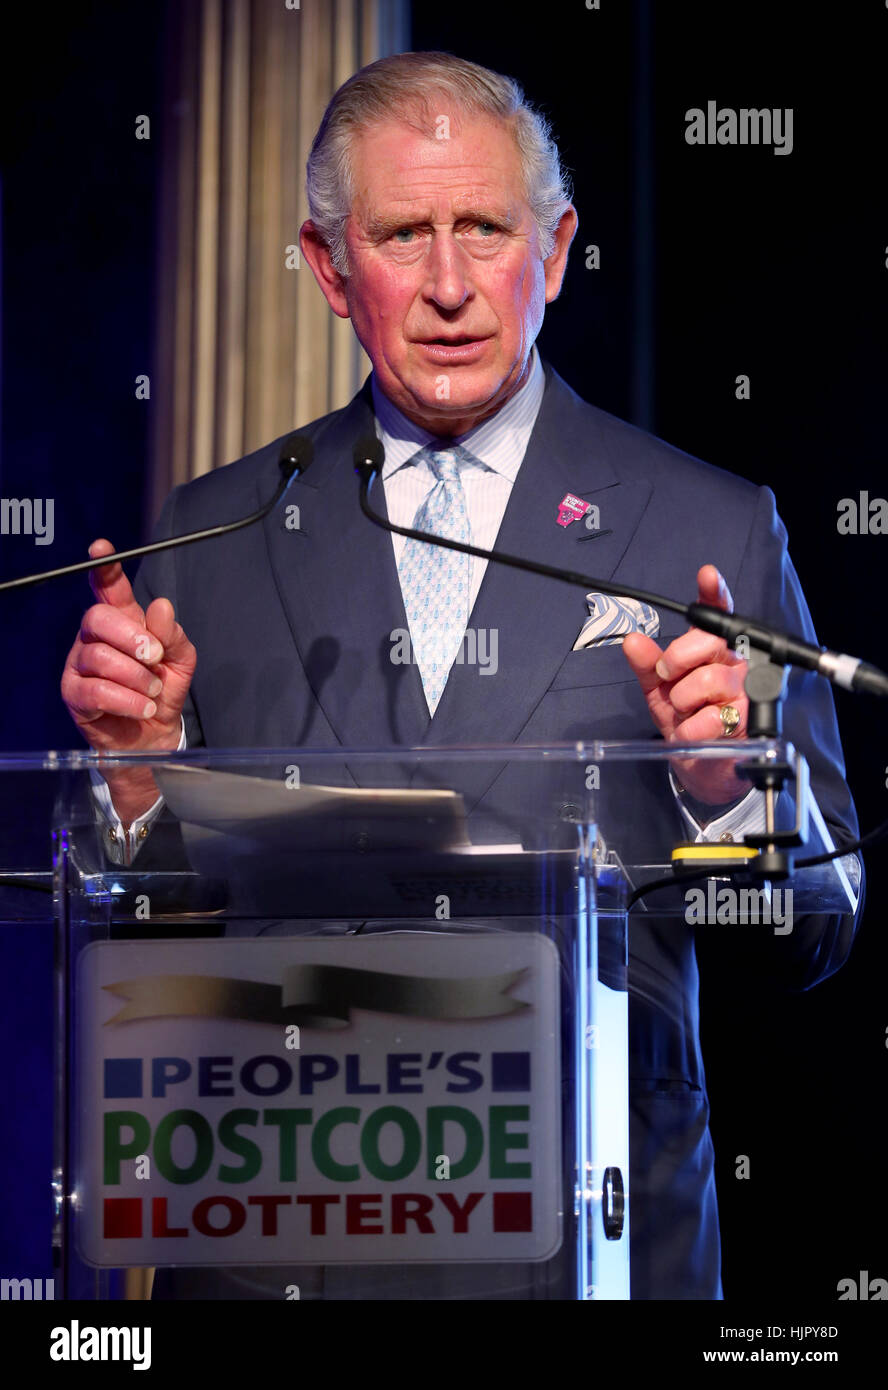 The Prince of Wales speaks during the pre-dinner reception of the People's Postcode Lottery Charity gala at Prestonfield House, Edinburgh. Stock Photo